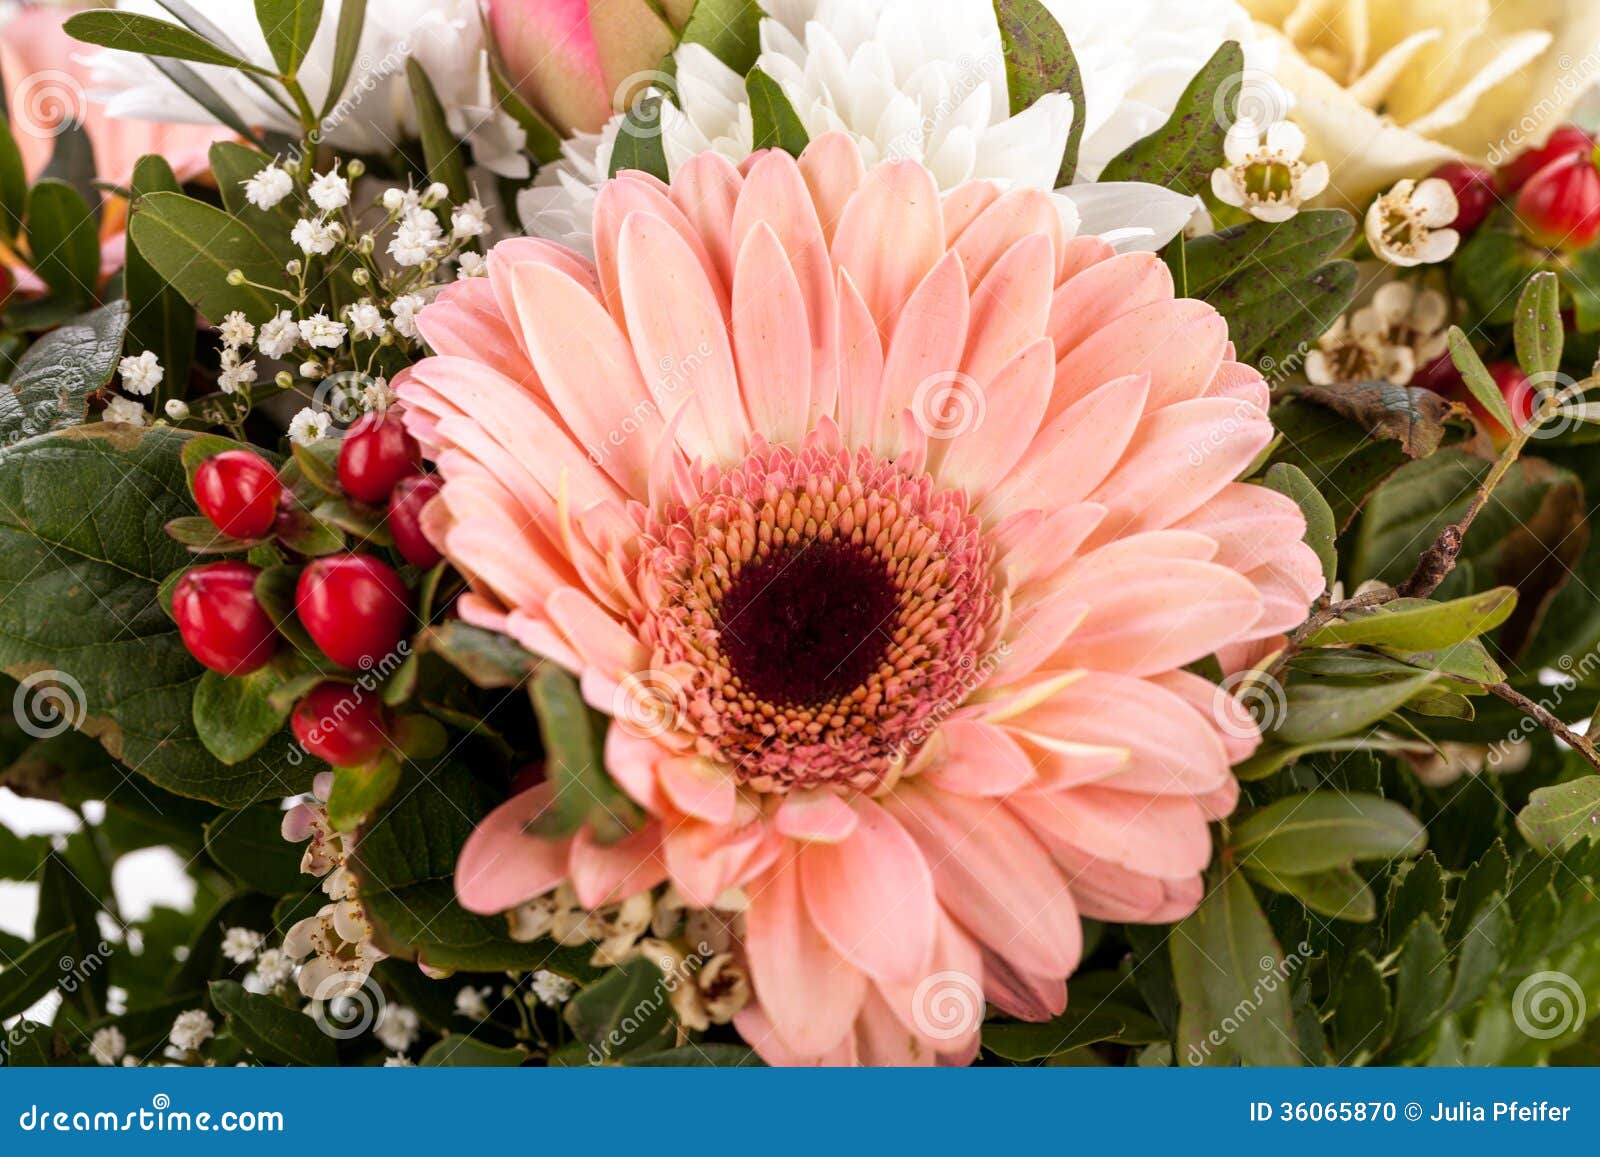 bouquet fresh pink white flowers gerbera daisy dahlia roses close up view as background celebrating 36065870